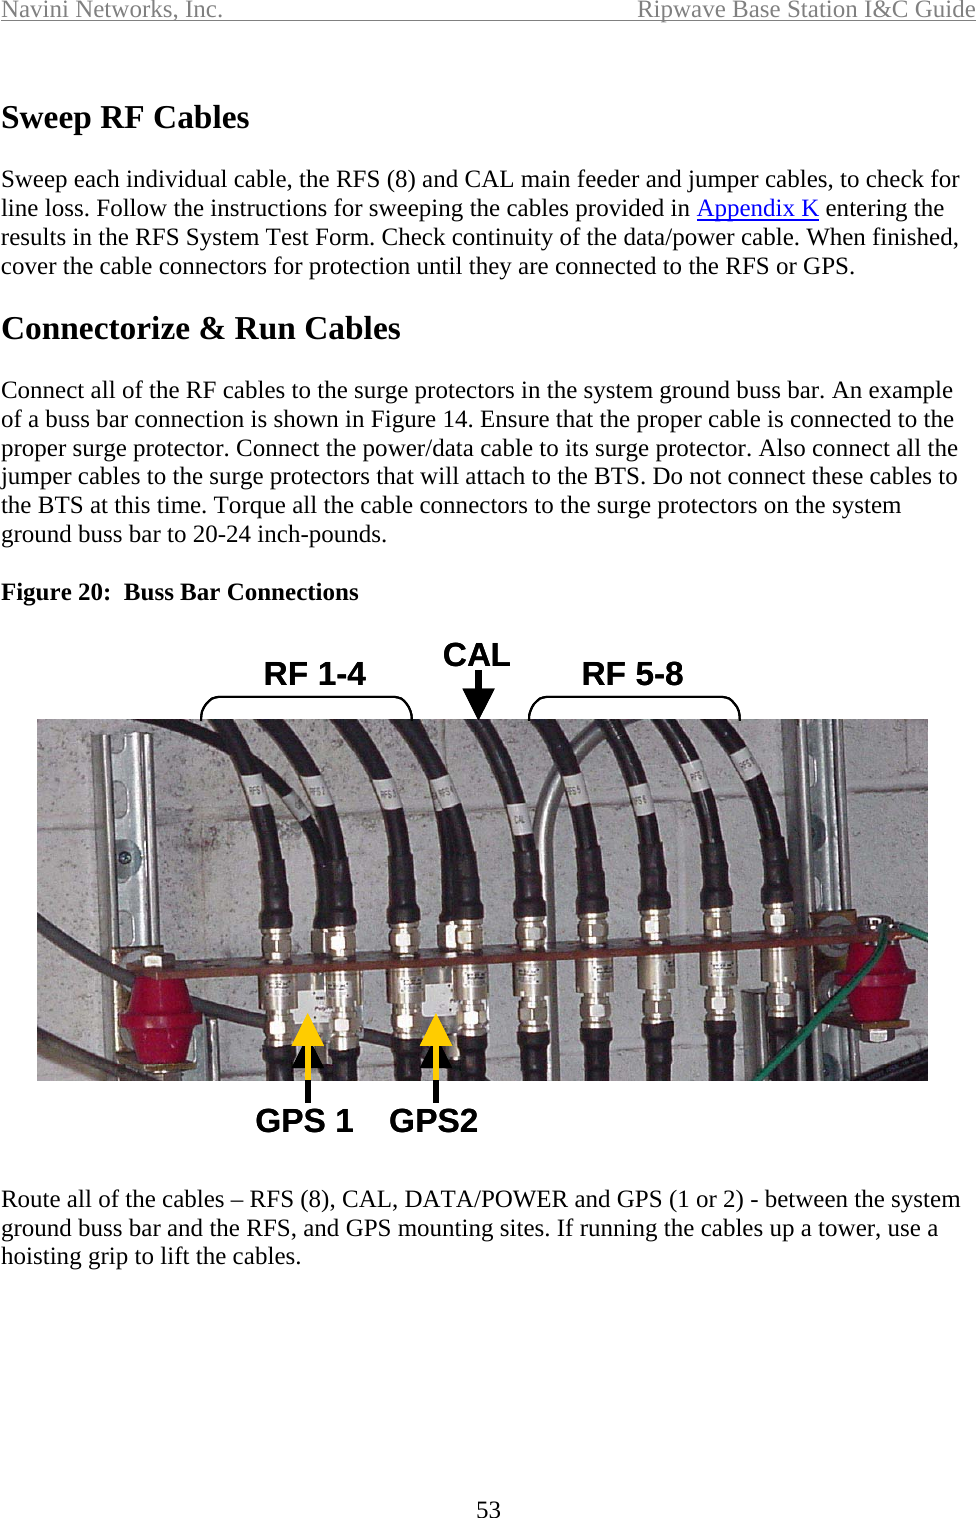 Navini Networks, Inc.  Ripwave Base Station I&amp;C Guide  53  Sweep RF Cables  Sweep each individual cable, the RFS (8) and CAL main feeder and jumper cables, to check for line loss. Follow the instructions for sweeping the cables provided in Appendix K entering the results in the RFS System Test Form. Check continuity of the data/power cable. When finished, cover the cable connectors for protection until they are connected to the RFS or GPS.  Connectorize &amp; Run Cables   Connect all of the RF cables to the surge protectors in the system ground buss bar. An example of a buss bar connection is shown in Figure 14. Ensure that the proper cable is connected to the proper surge protector. Connect the power/data cable to its surge protector. Also connect all the jumper cables to the surge protectors that will attach to the BTS. Do not connect these cables to the BTS at this time. Torque all the cable connectors to the surge protectors on the system ground buss bar to 20-24 inch-pounds.  Figure 20:  Buss Bar Connections  Route all of the cables – RFS (8), CAL, DATA/POWER and GPS (1 or 2) - between the system ground buss bar and the RFS, and GPS mounting sites. If running the cables up a tower, use a hoisting grip to lift the cables.   GPS 1 GPS2RF 1-4 RF 5-8CALGPS 1 GPS2RF 1-4 RF 5-8CAL